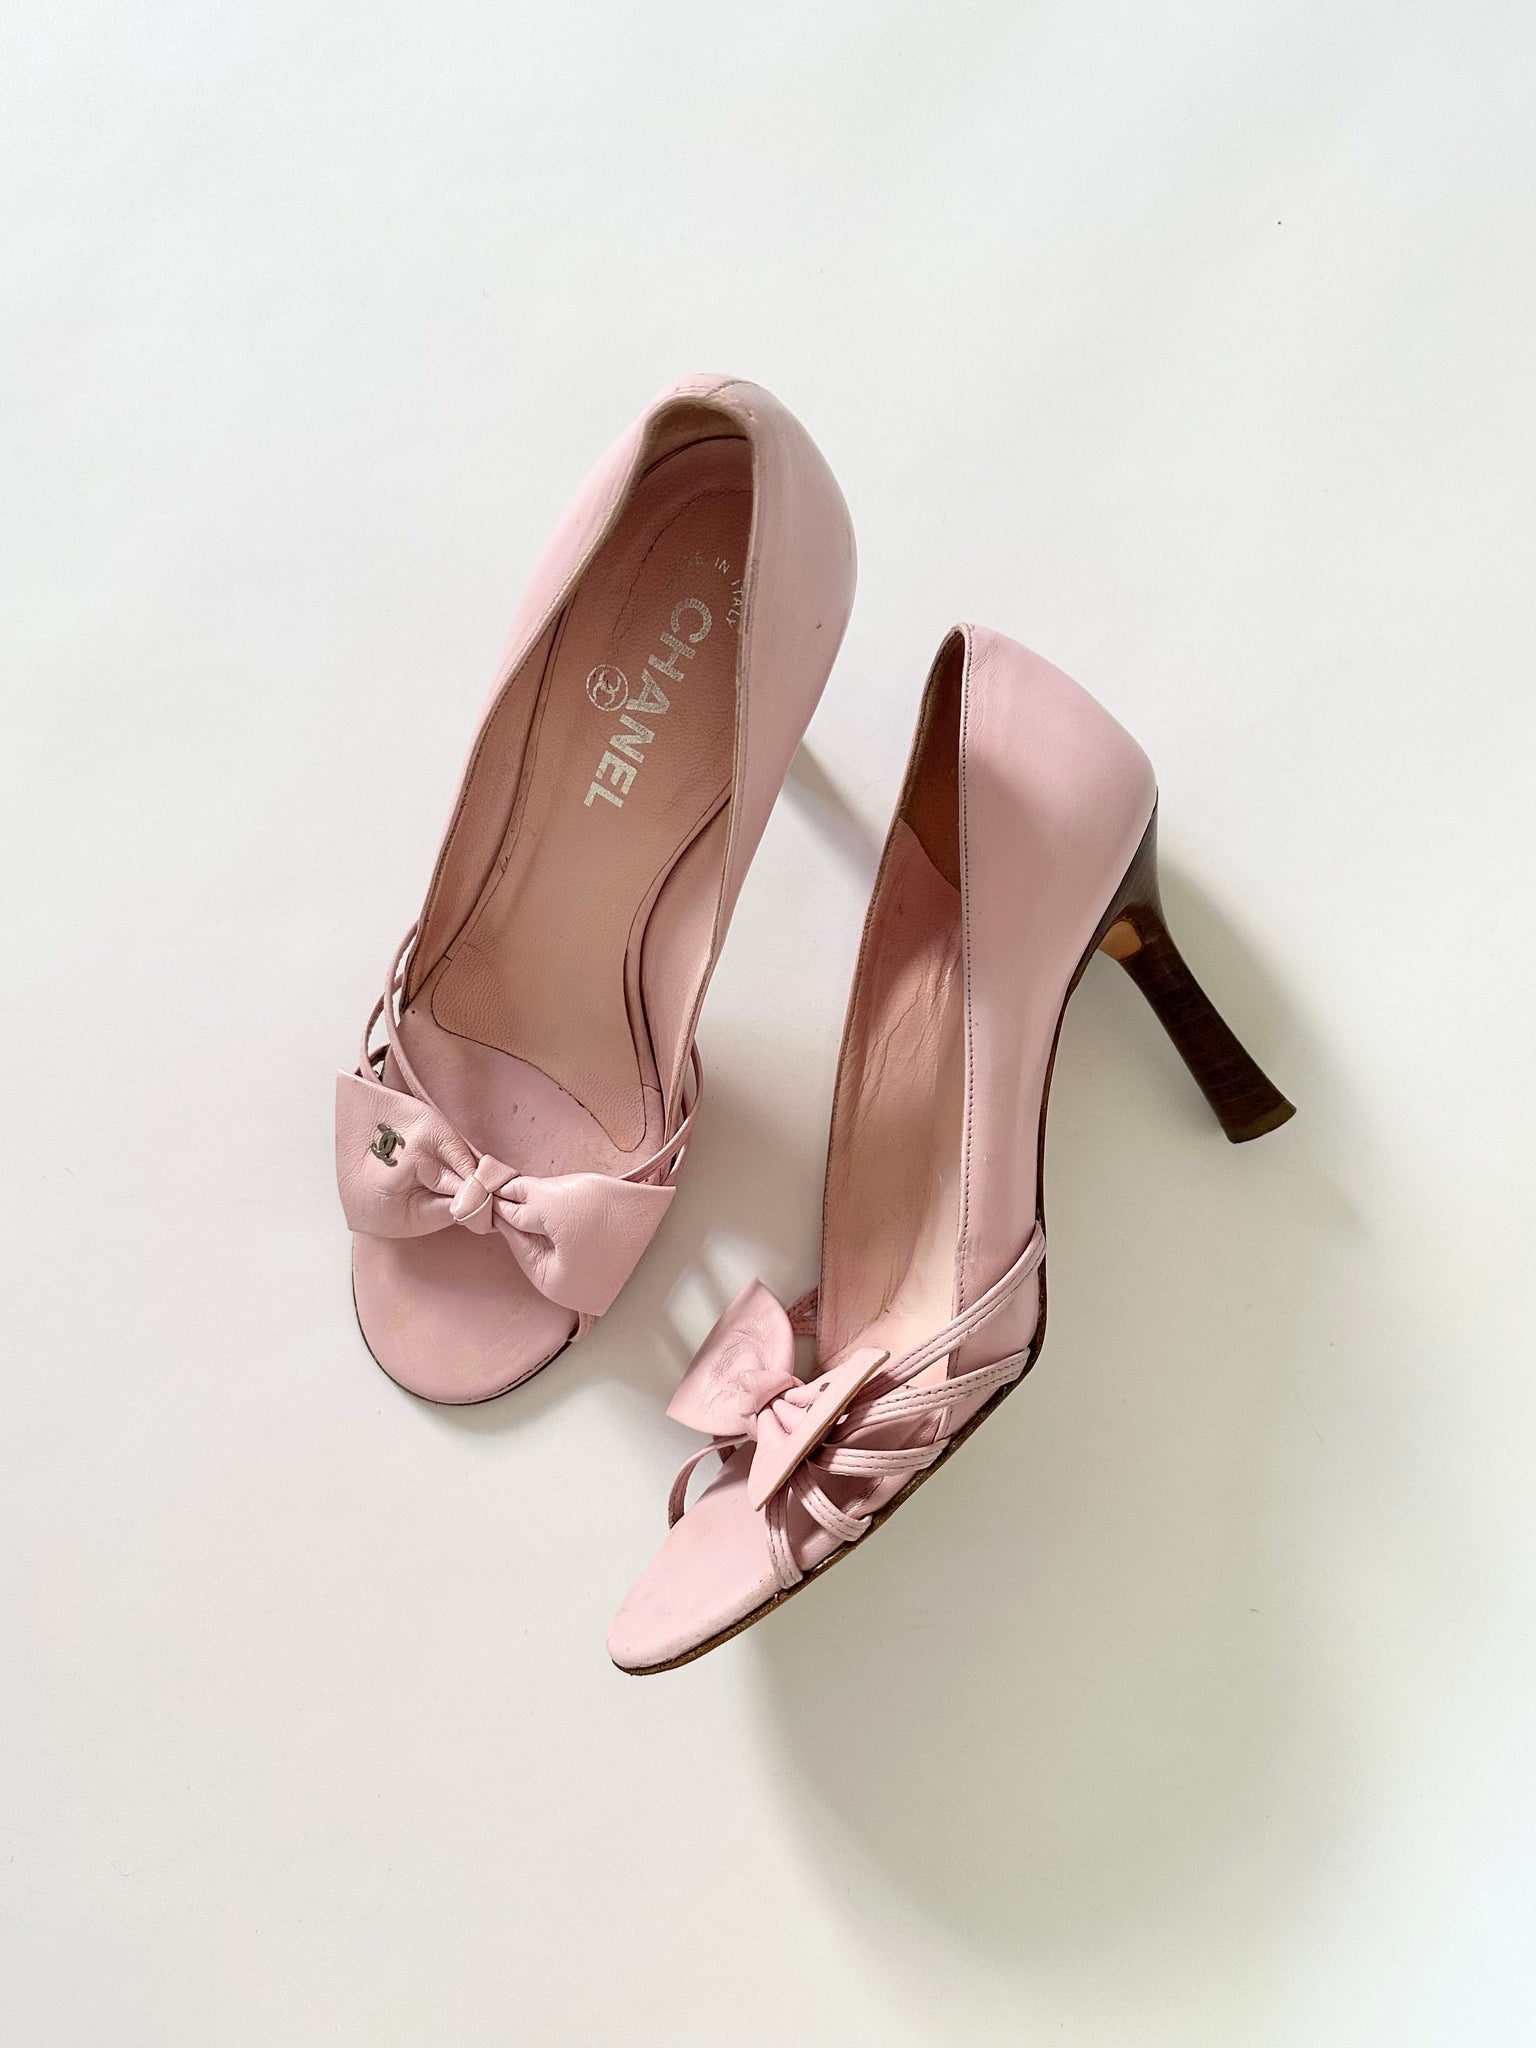 CHANEL, Shoes, Chanel Cc Embroidered Slingback Pumps